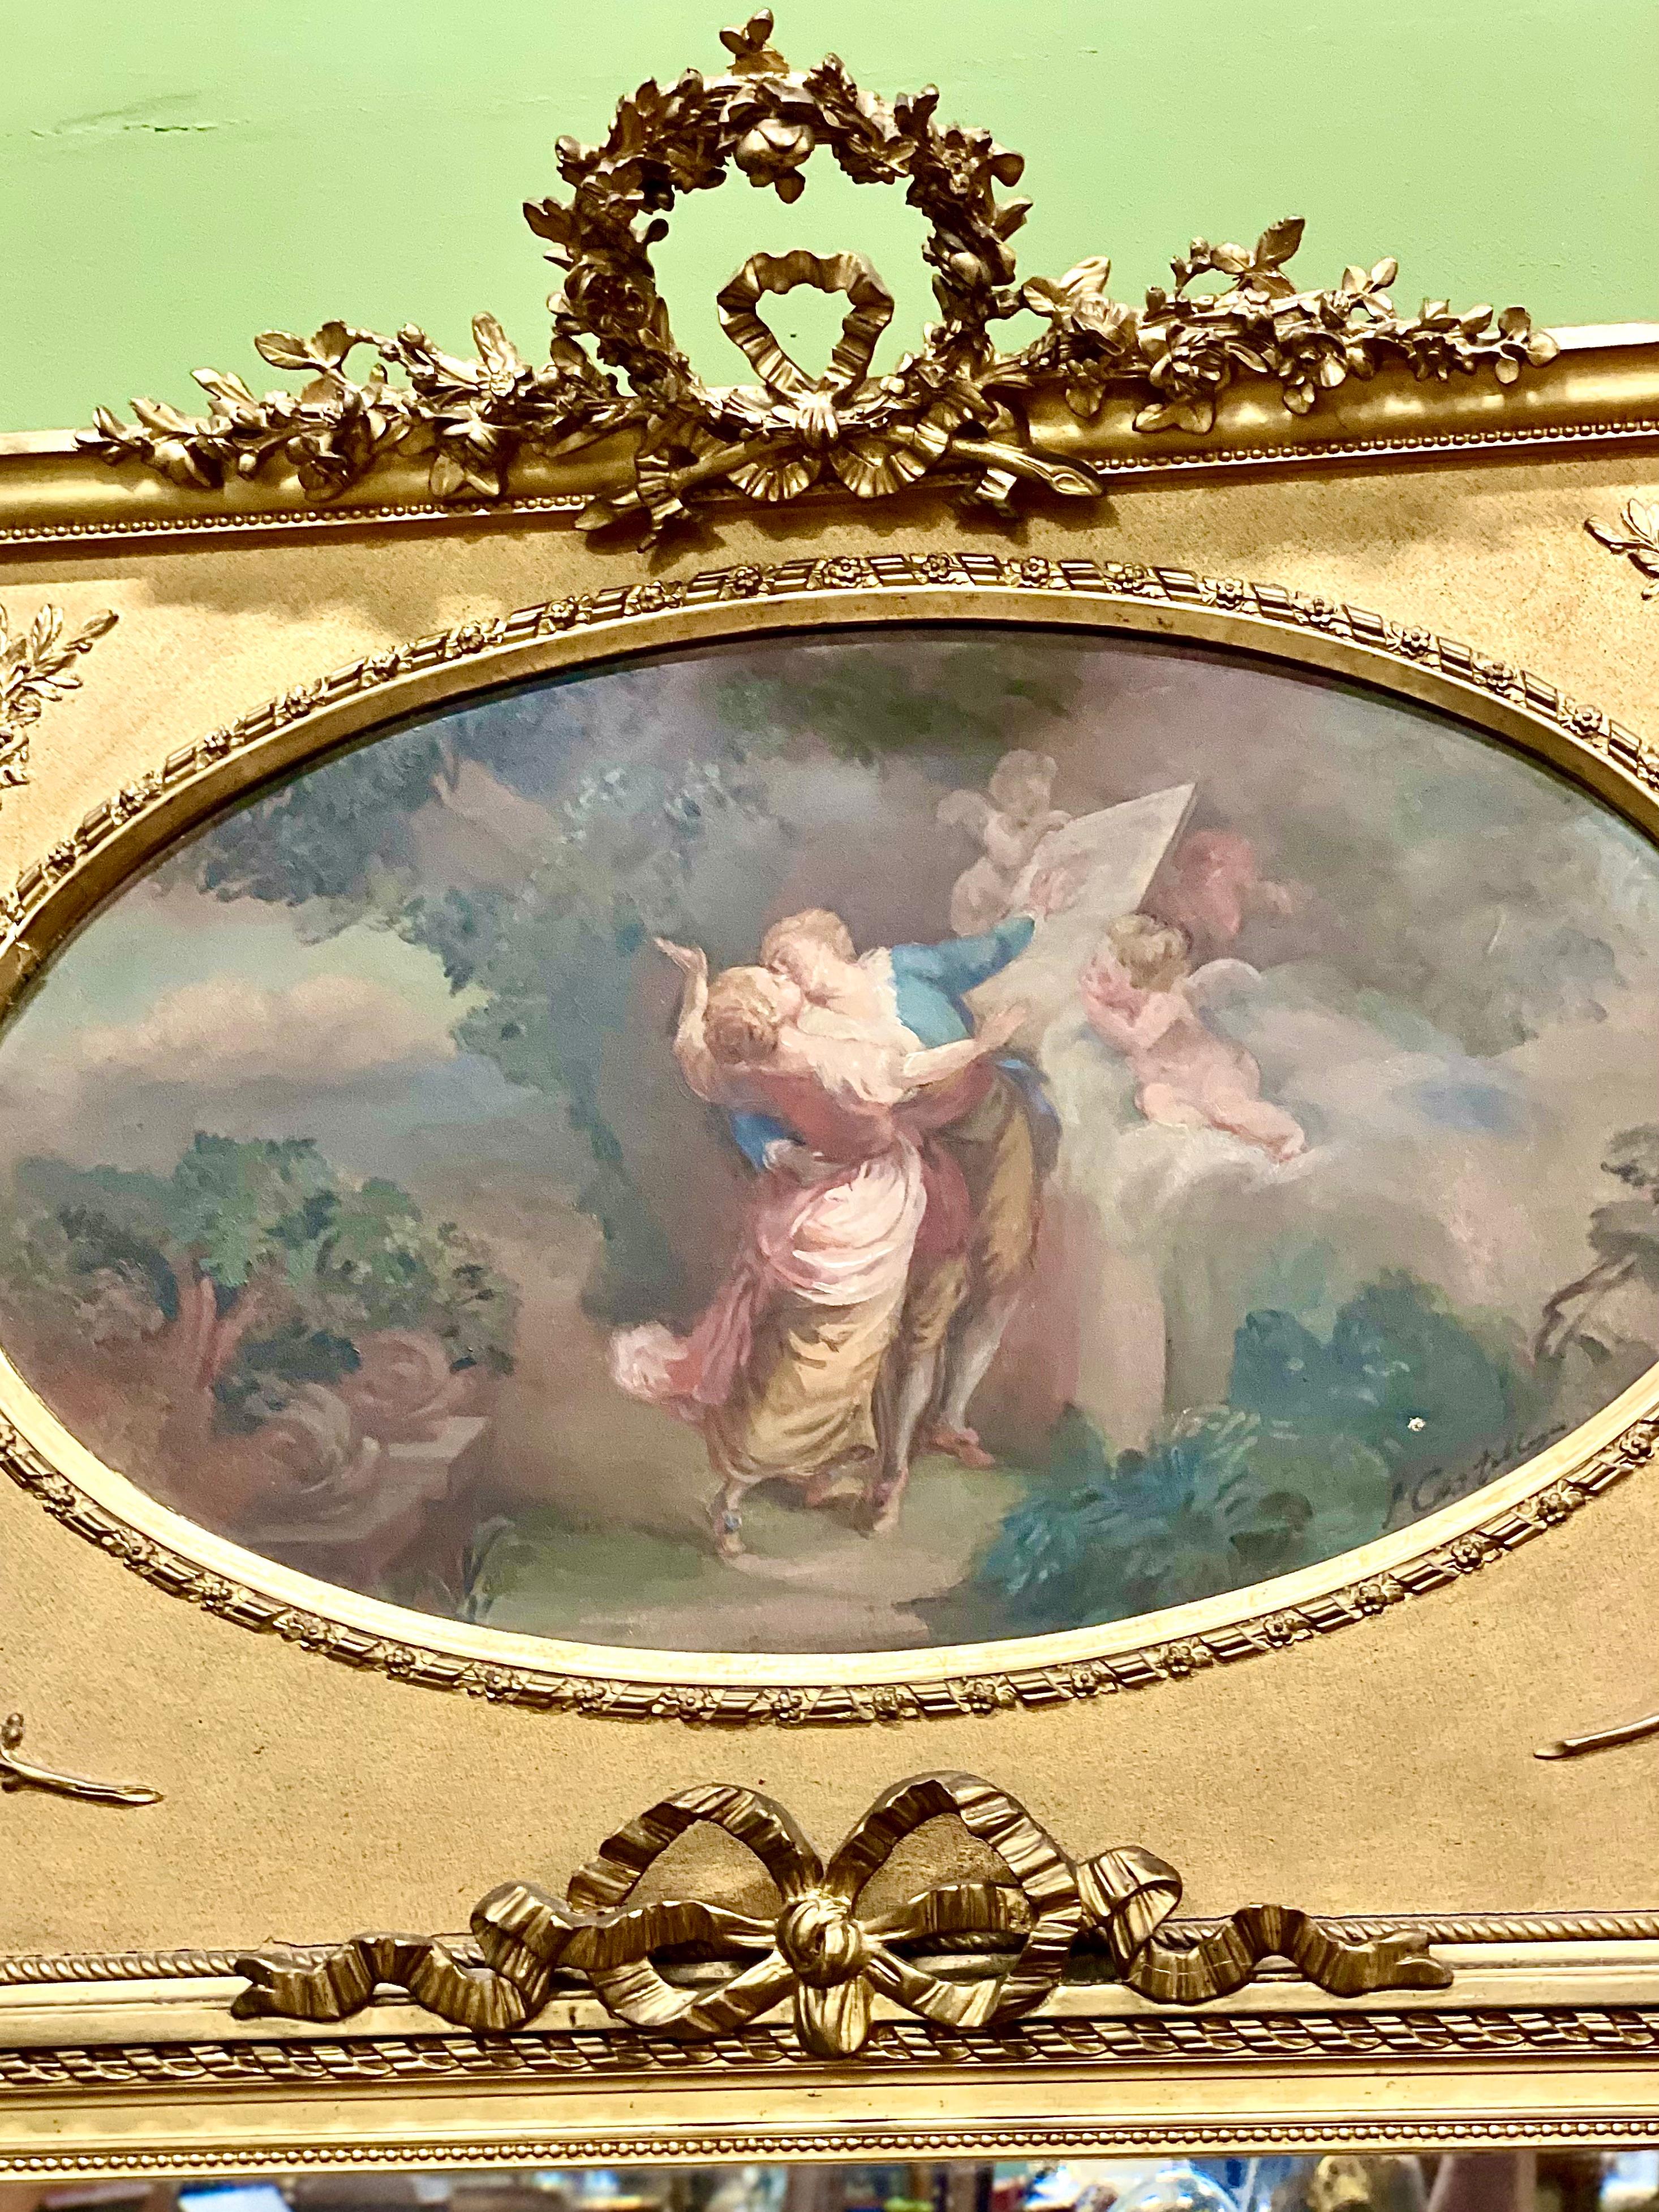 A 19th-century French 'trumeau' (or 'pier glass') mirror, in gilded wood. This large and imposing Louis XVI-style, Napoléon III epoque mirror would have originally been set into the wood panelling or wall space between two windows to amplify the